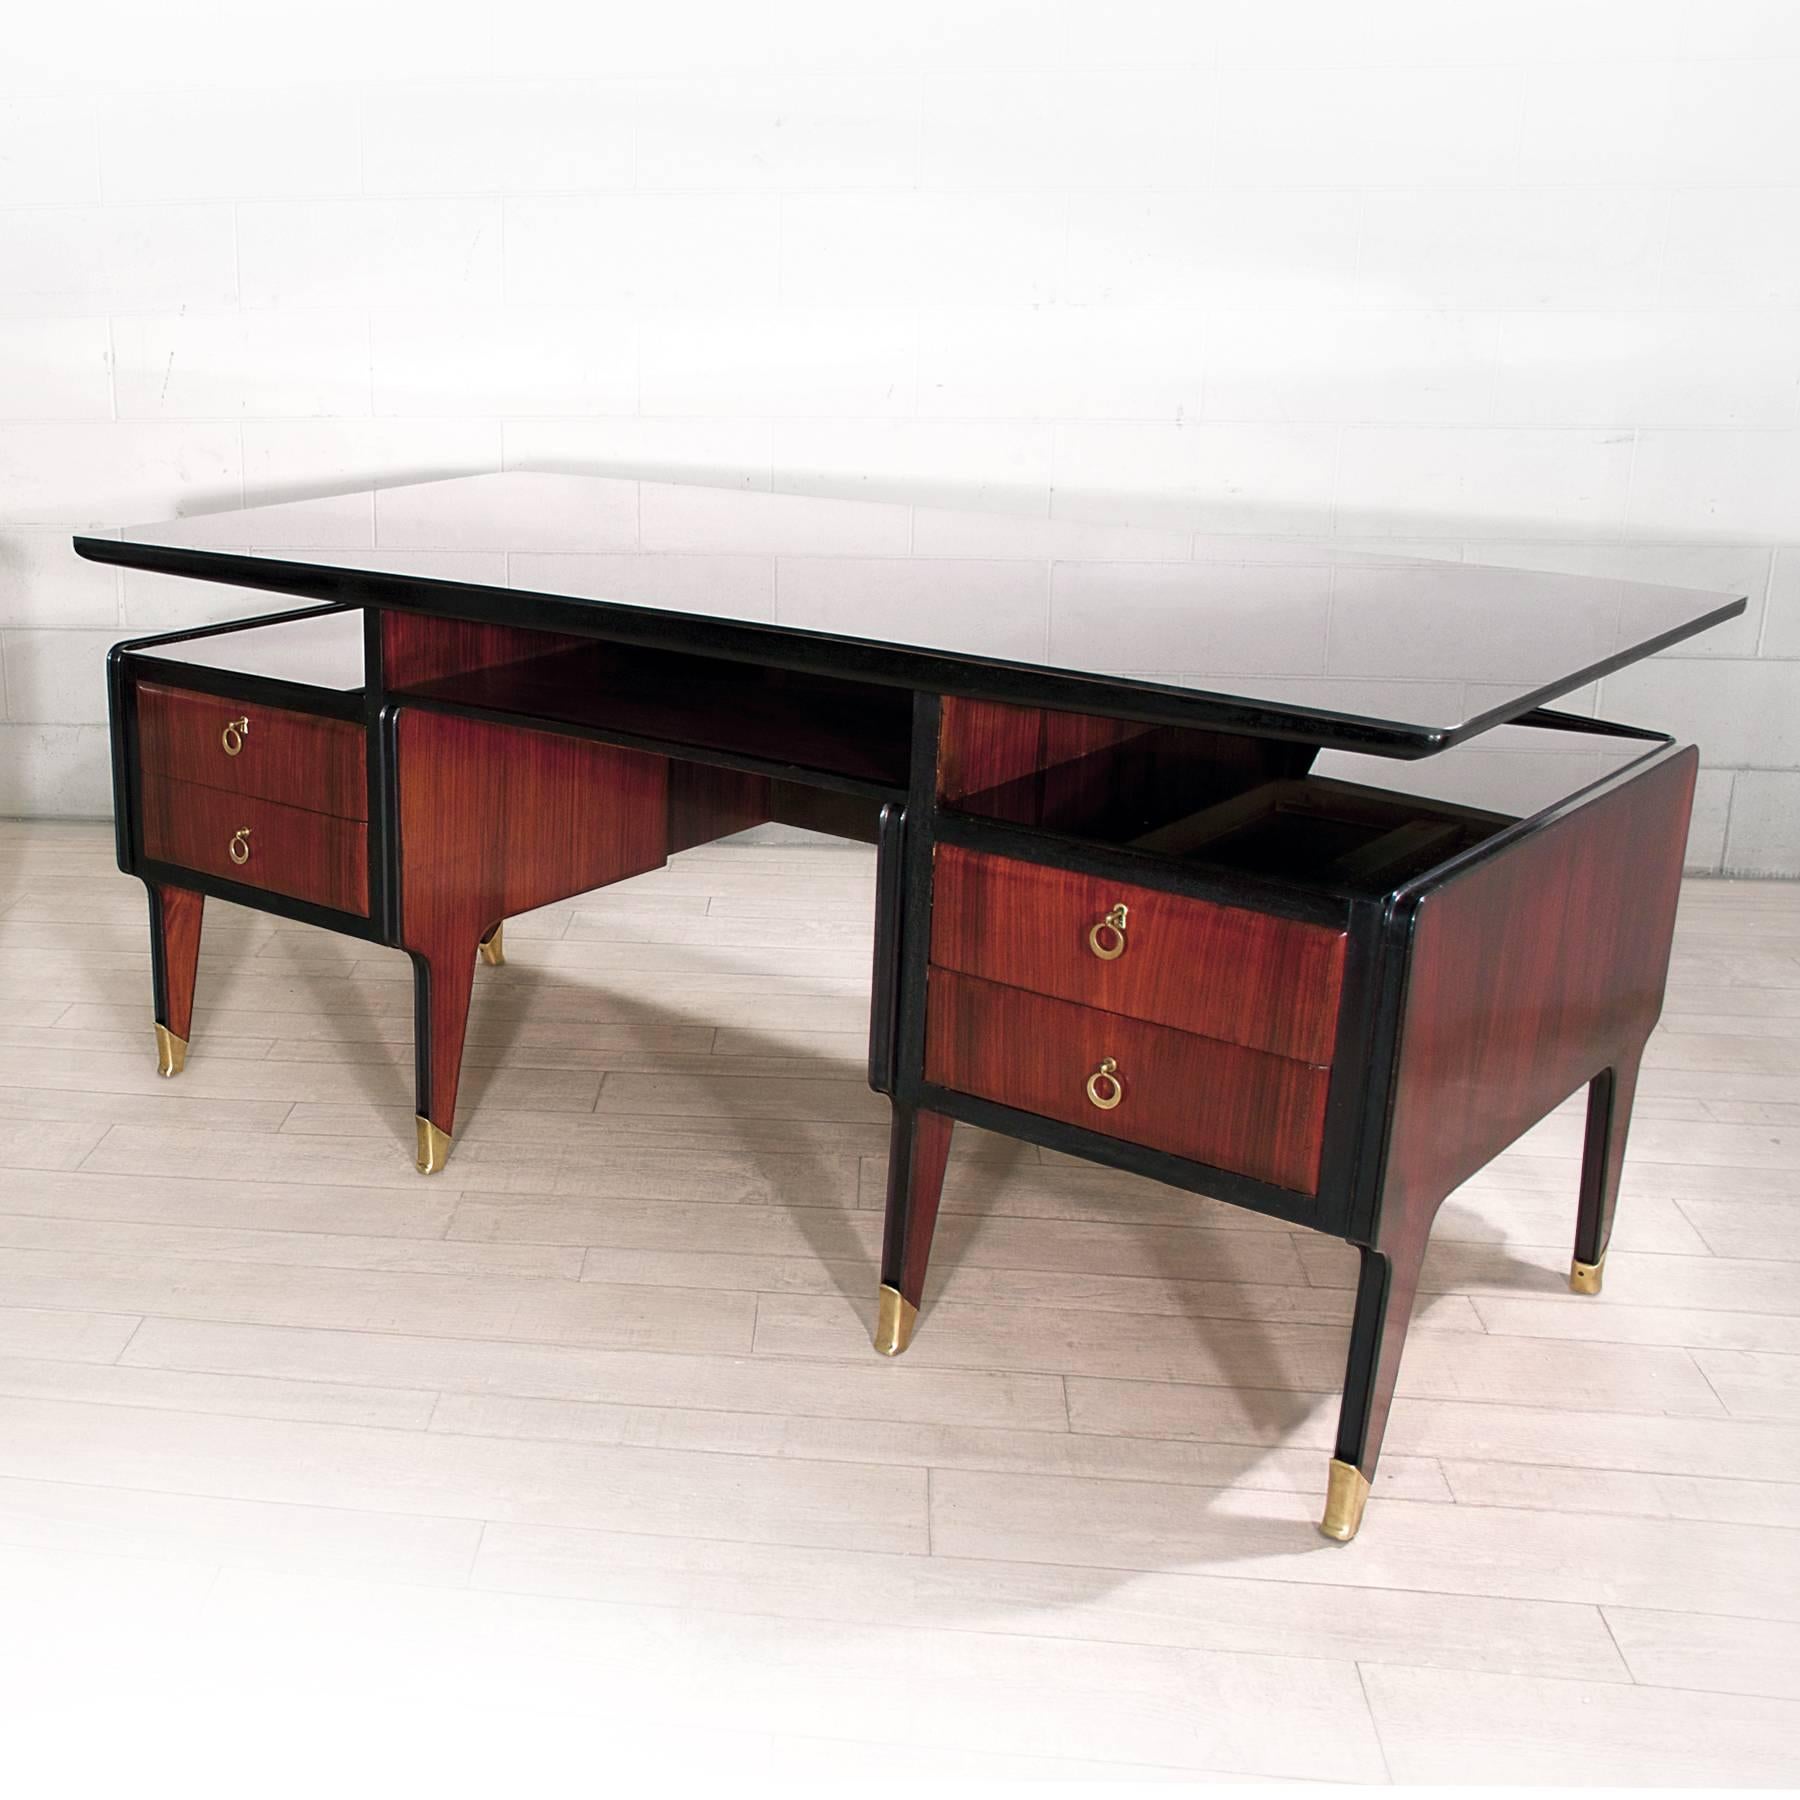 This stylish executive desk has been designed by Vittorio Dassi in the 1950s.
Its structure is rosewood with tapered legs finished with brass sabots, the top table has slightly curved form and is made of black glass, as well as their two side open